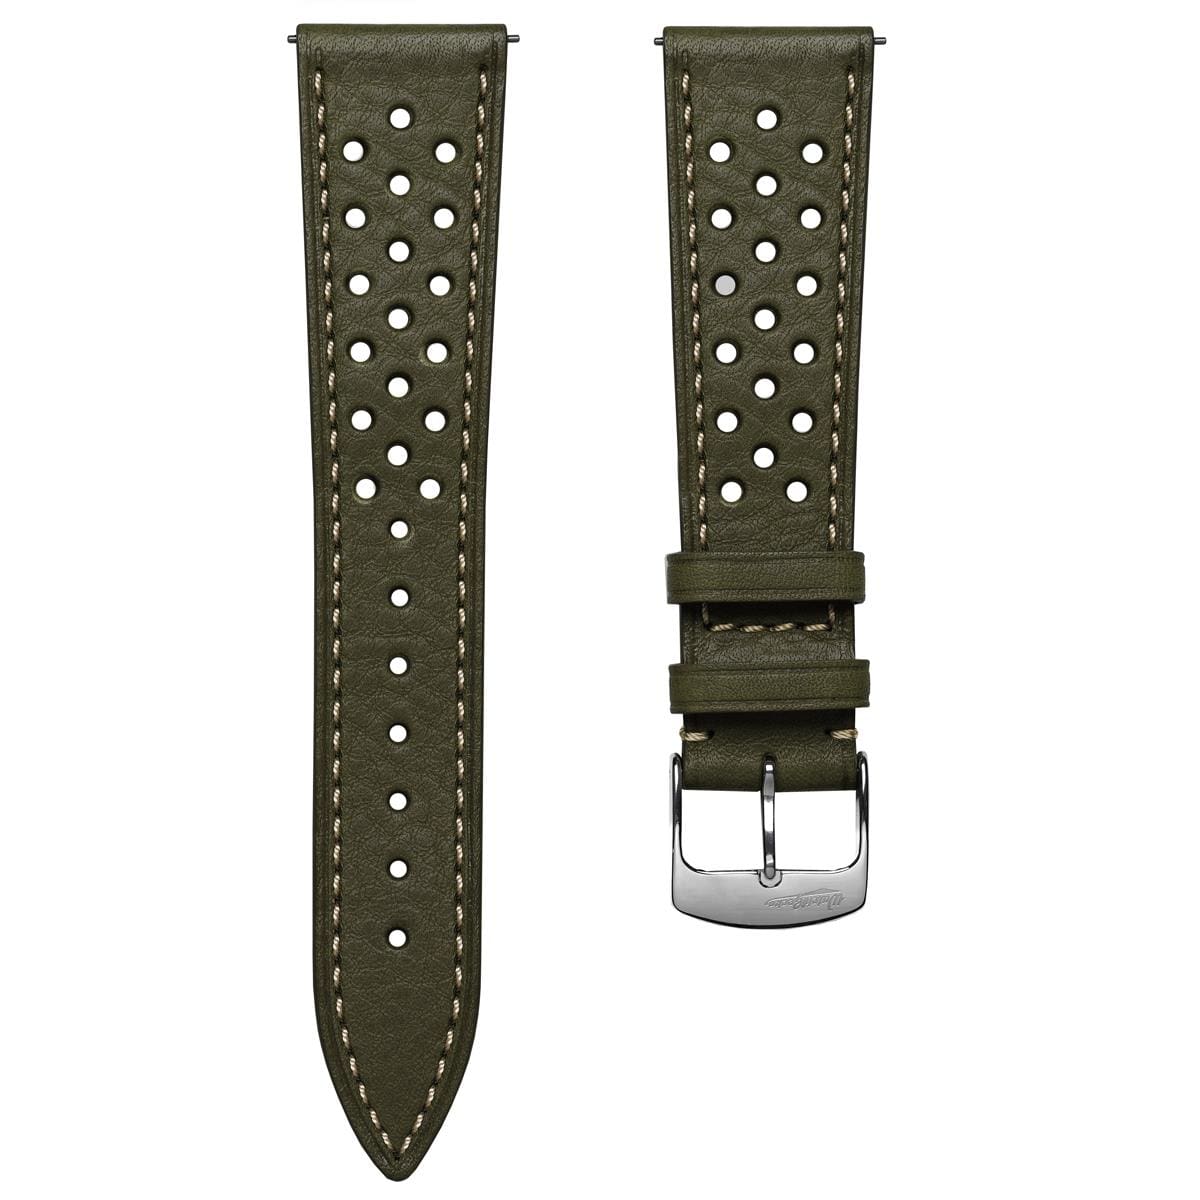 Olive Green Racing Leather Watch Strap